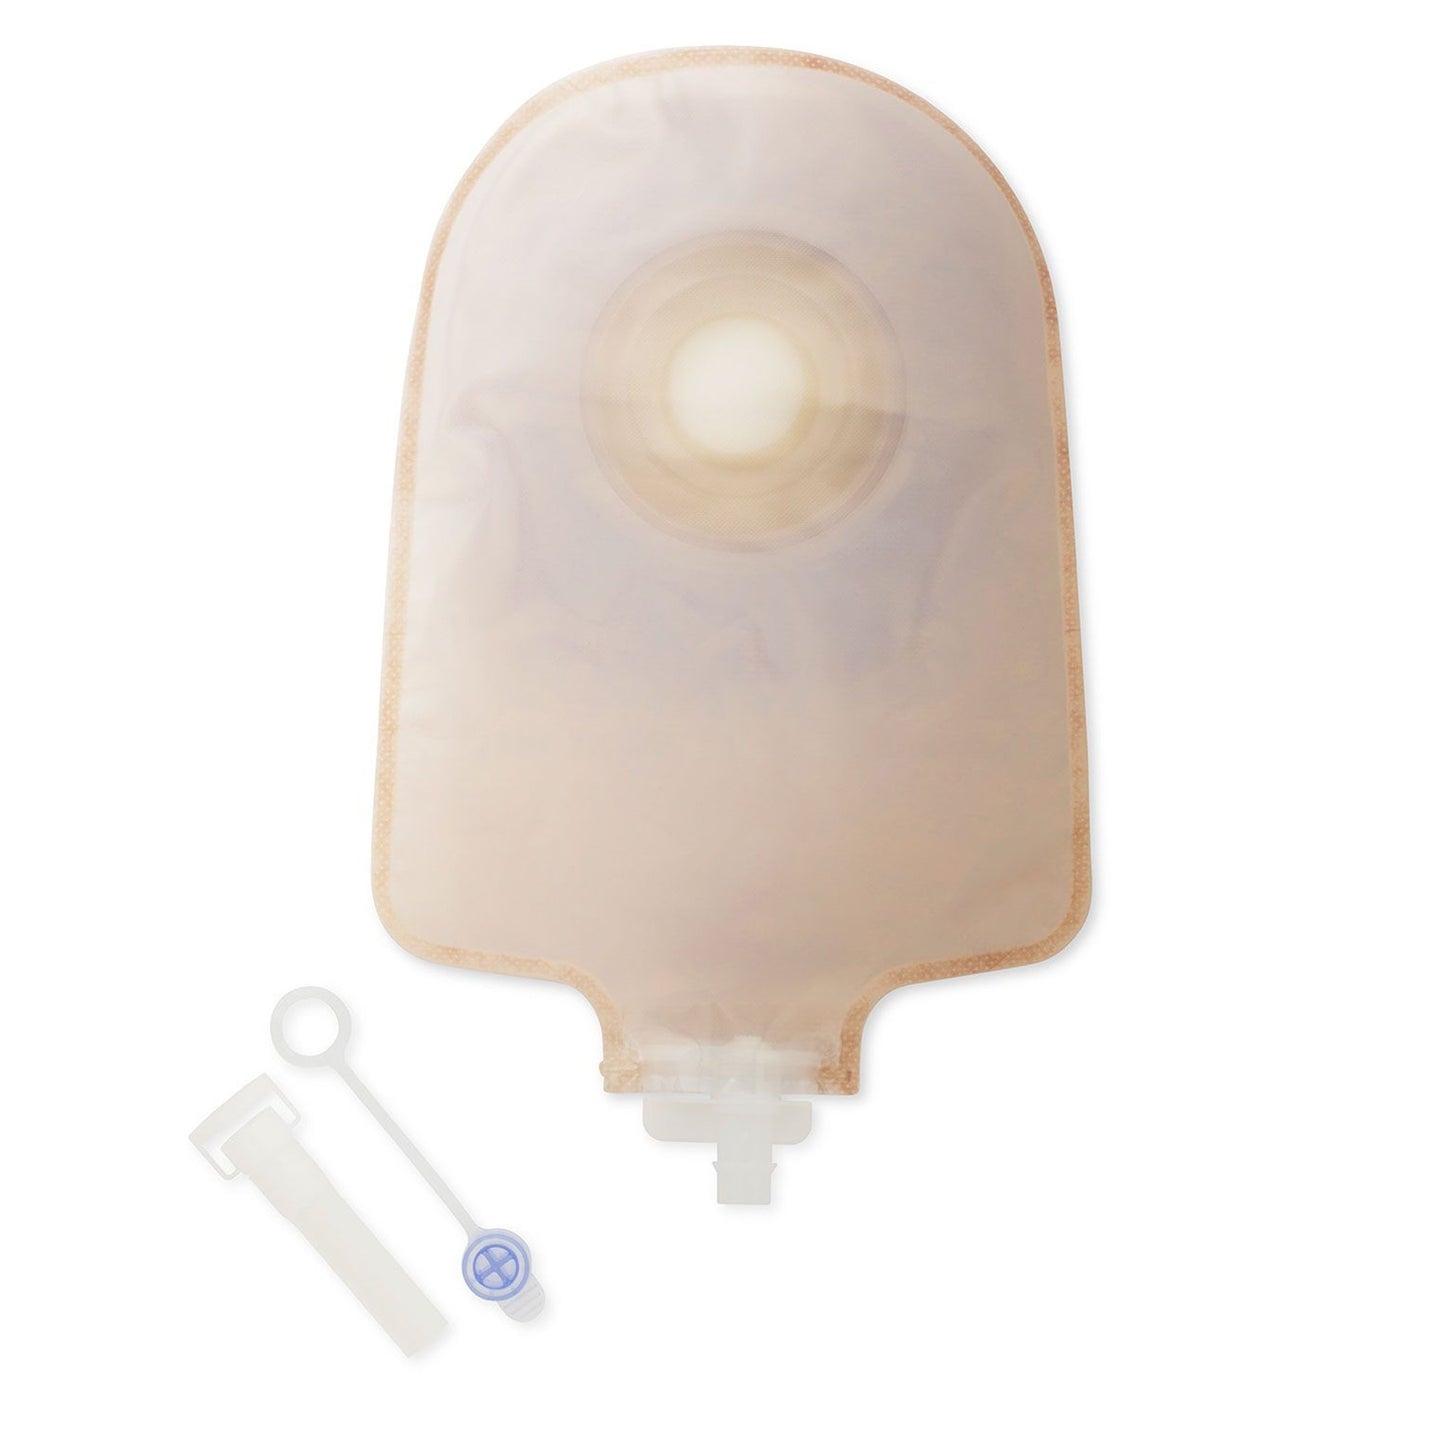 Premier™ One-Piece Drainable Transparent Urostomy Pouch, 9 Inch Length, 1-1/8 Inch Stoma, 5 ct